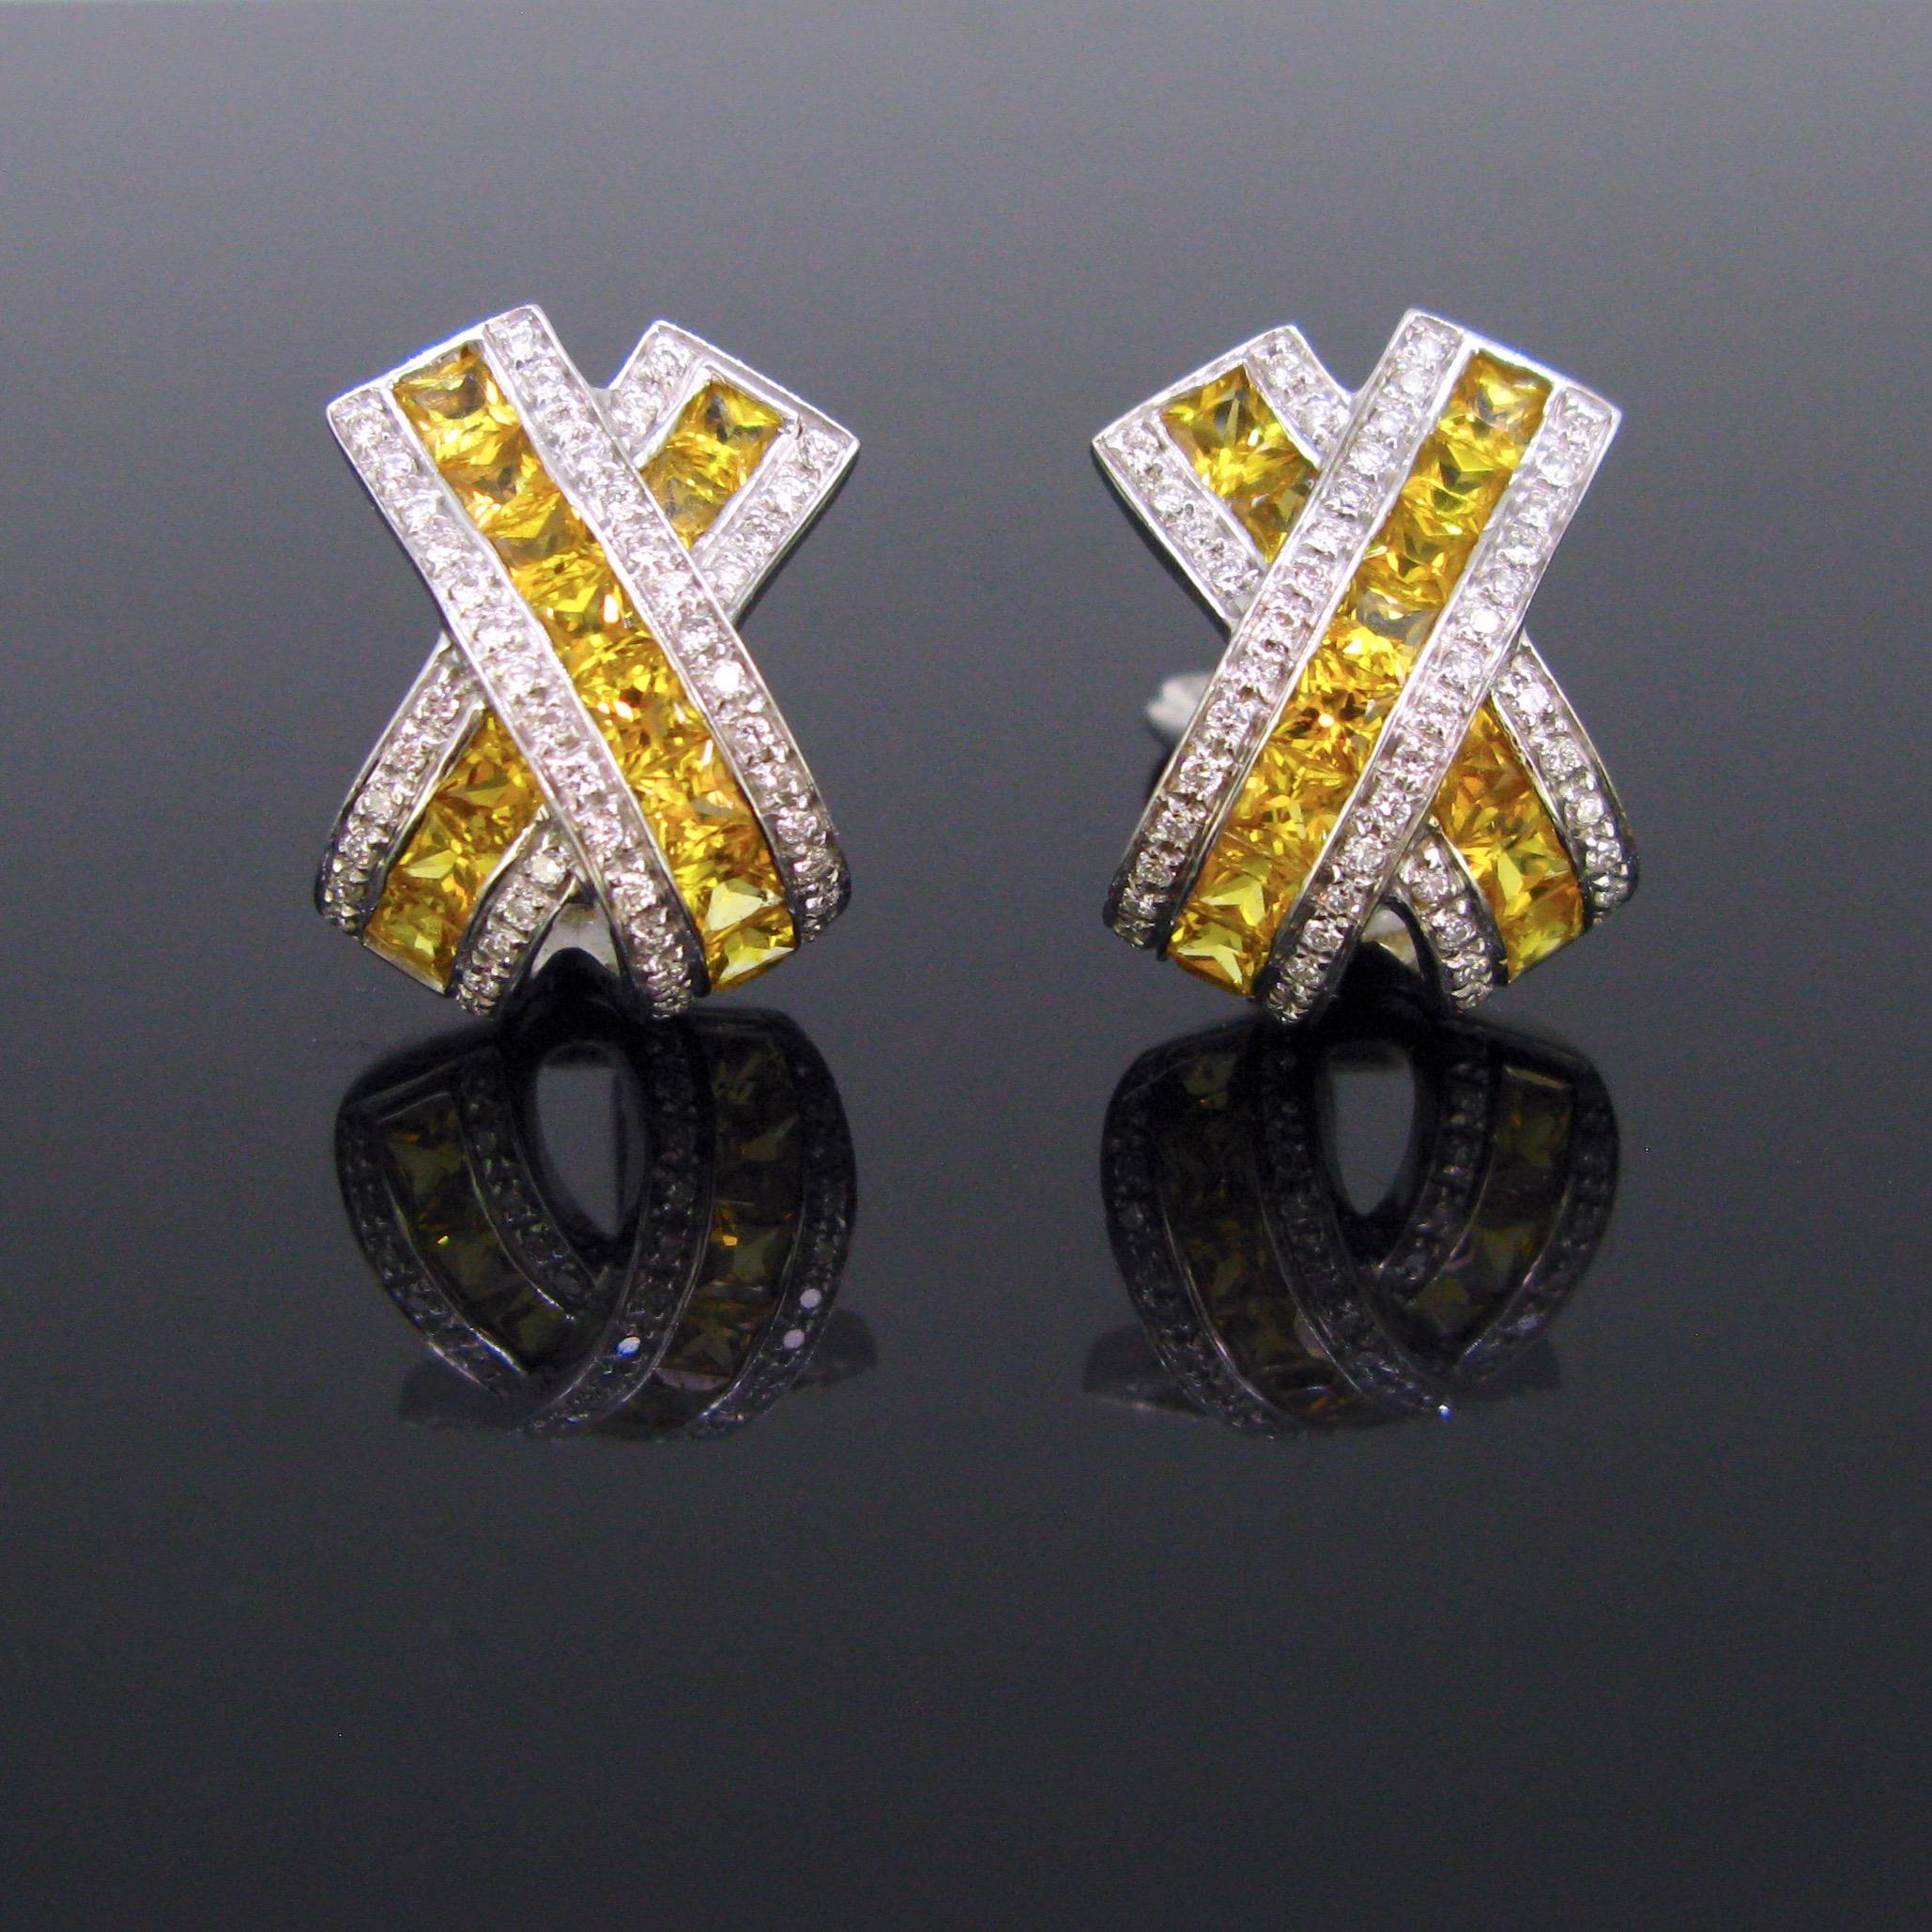 This pair of earrings has a nice X shape design. It is set with French cut yellow sapphires shouldered with brilliant cut diamonds. There is an approximate total carat weight of 7ct of sapphires. The earrings are made in 18kt white gold. They are in